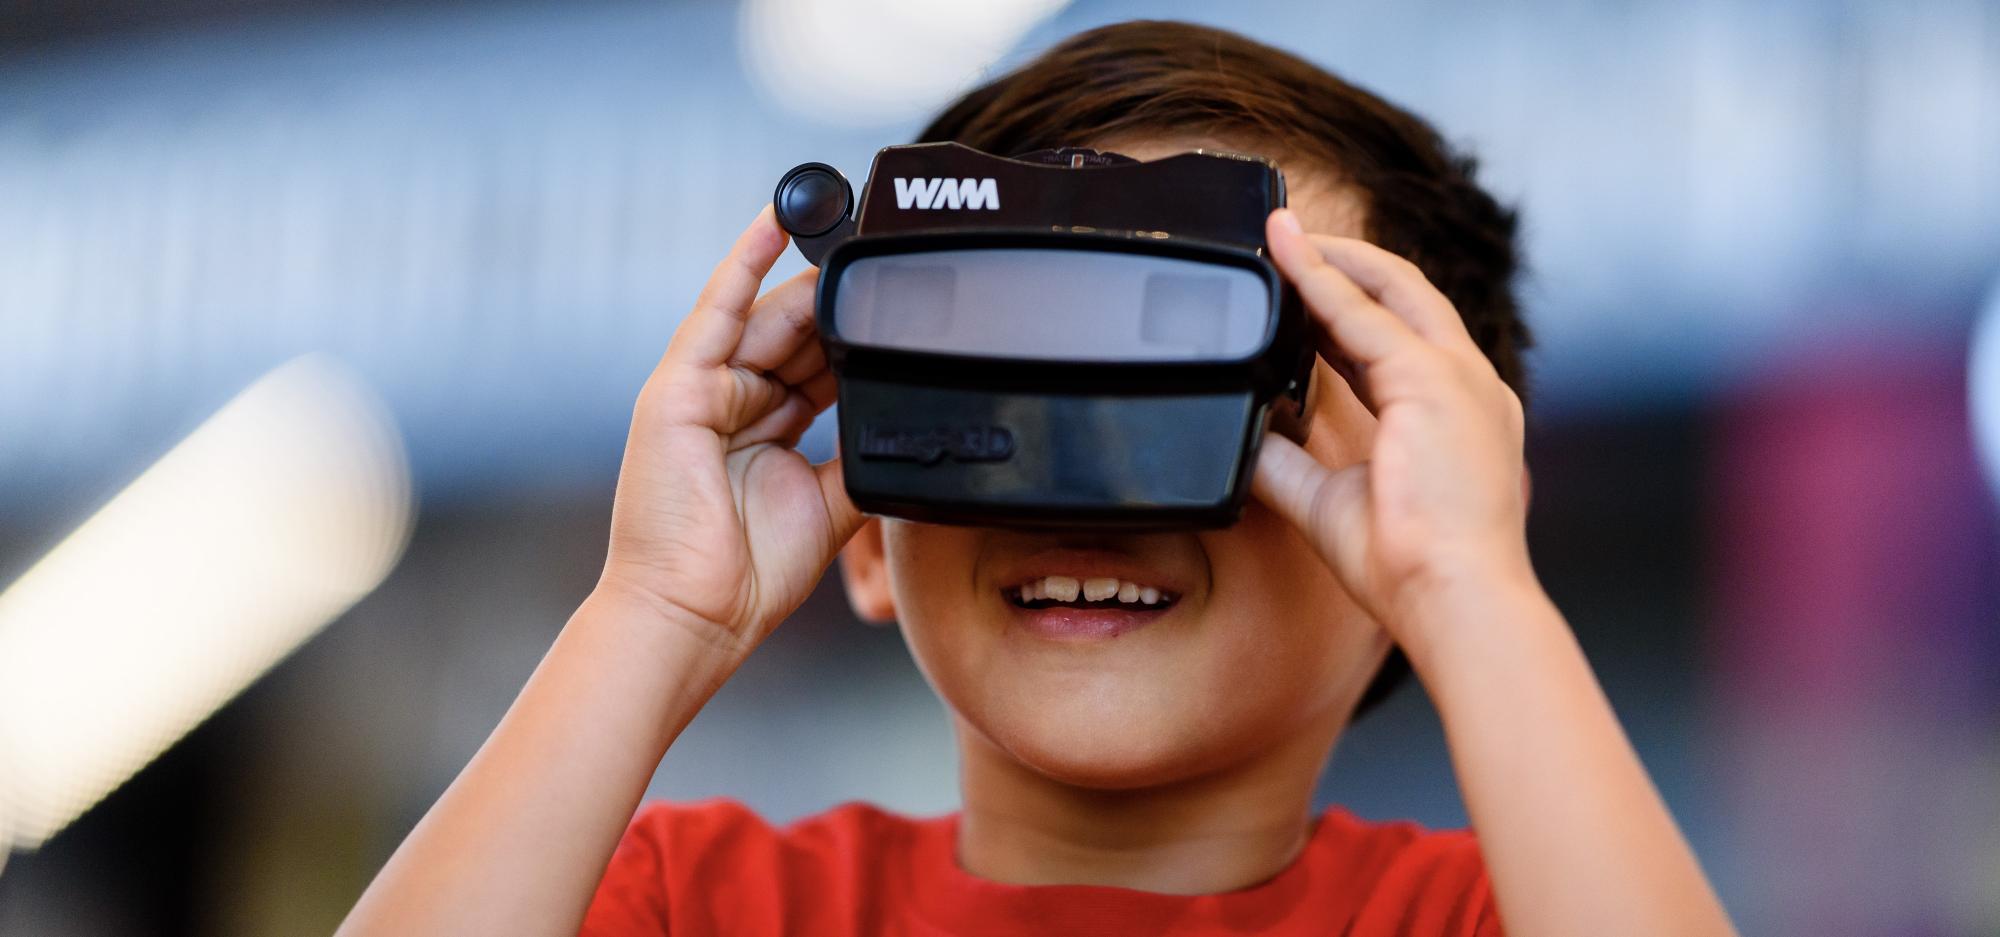 A young child holding a Viewfinder up to their face and smiling.